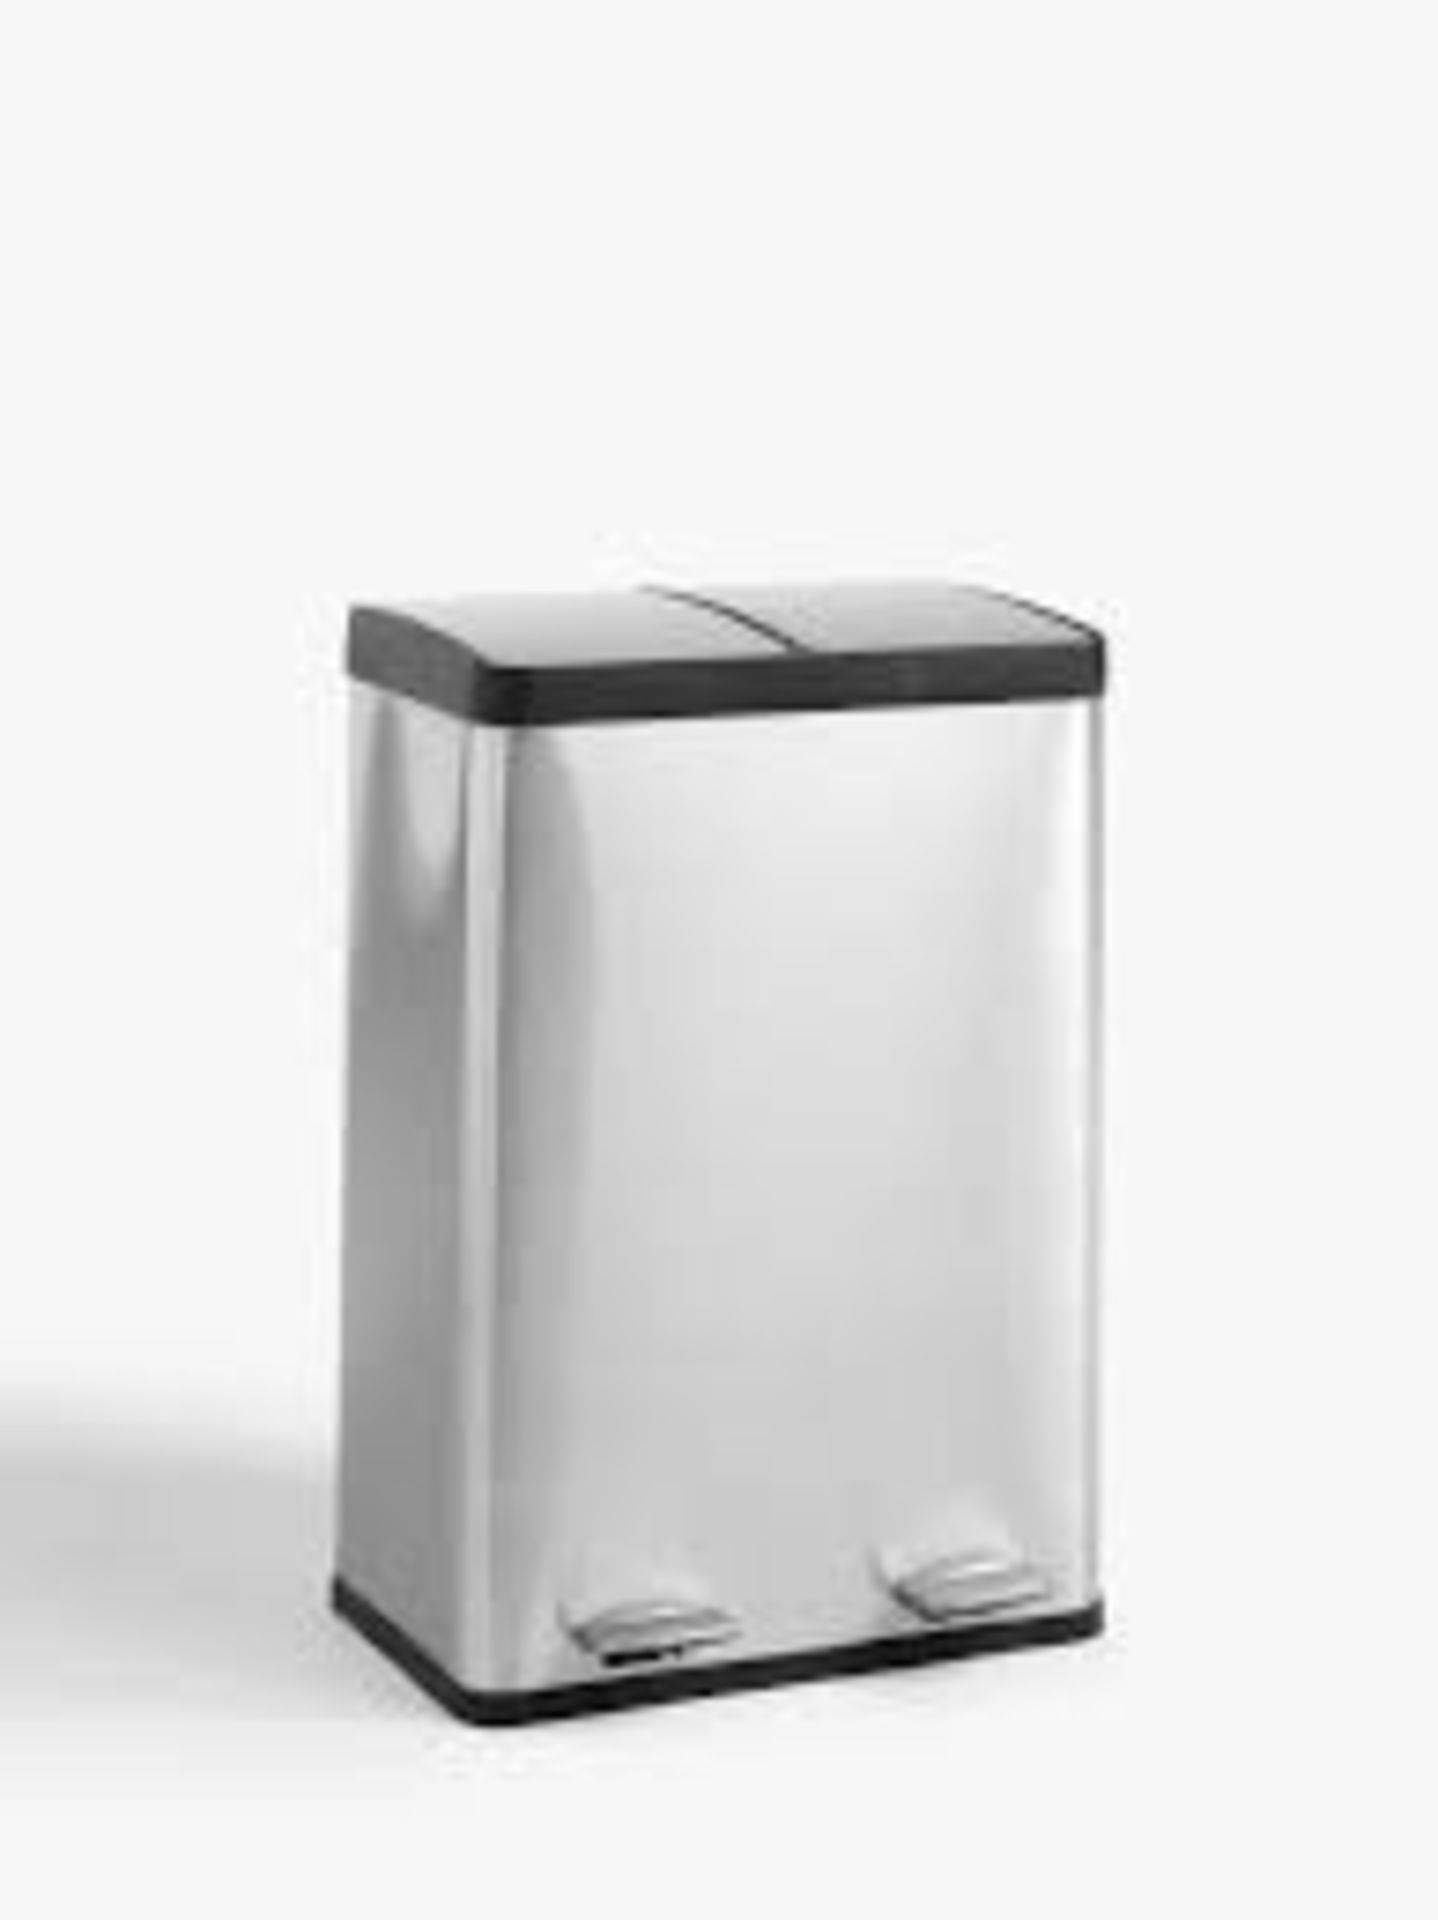 Boxed John Lewis & Partners 40 Litre Stainless Steel Recycling Bin RRP £75 (NBW295018) (Pictures Are